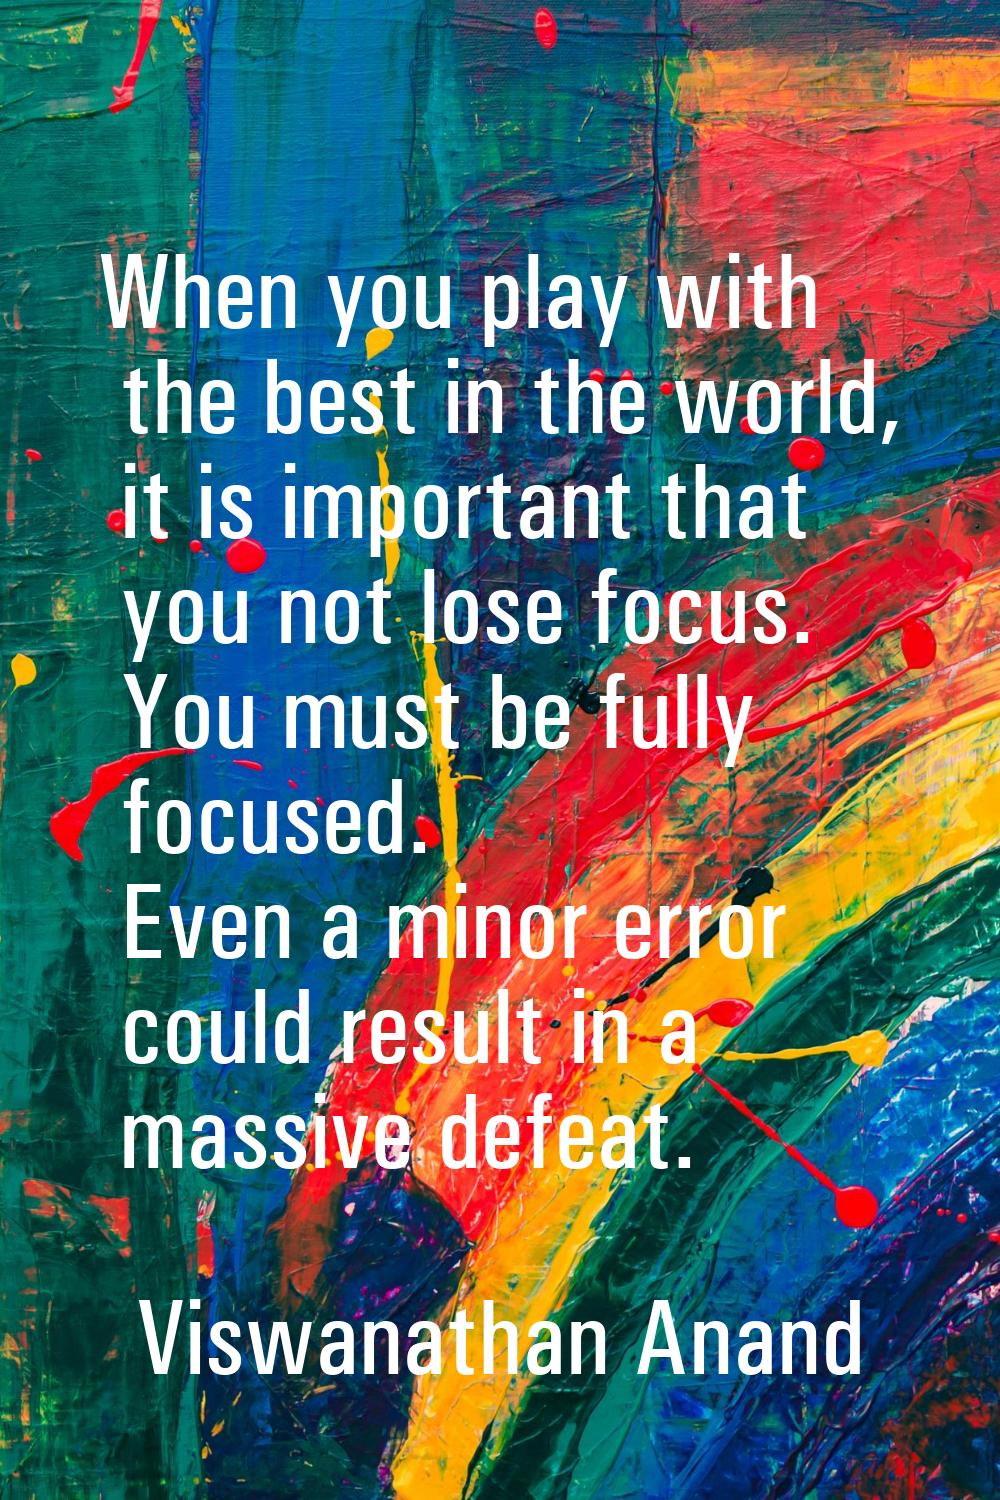 When you play with the best in the world, it is important that you not lose focus. You must be full